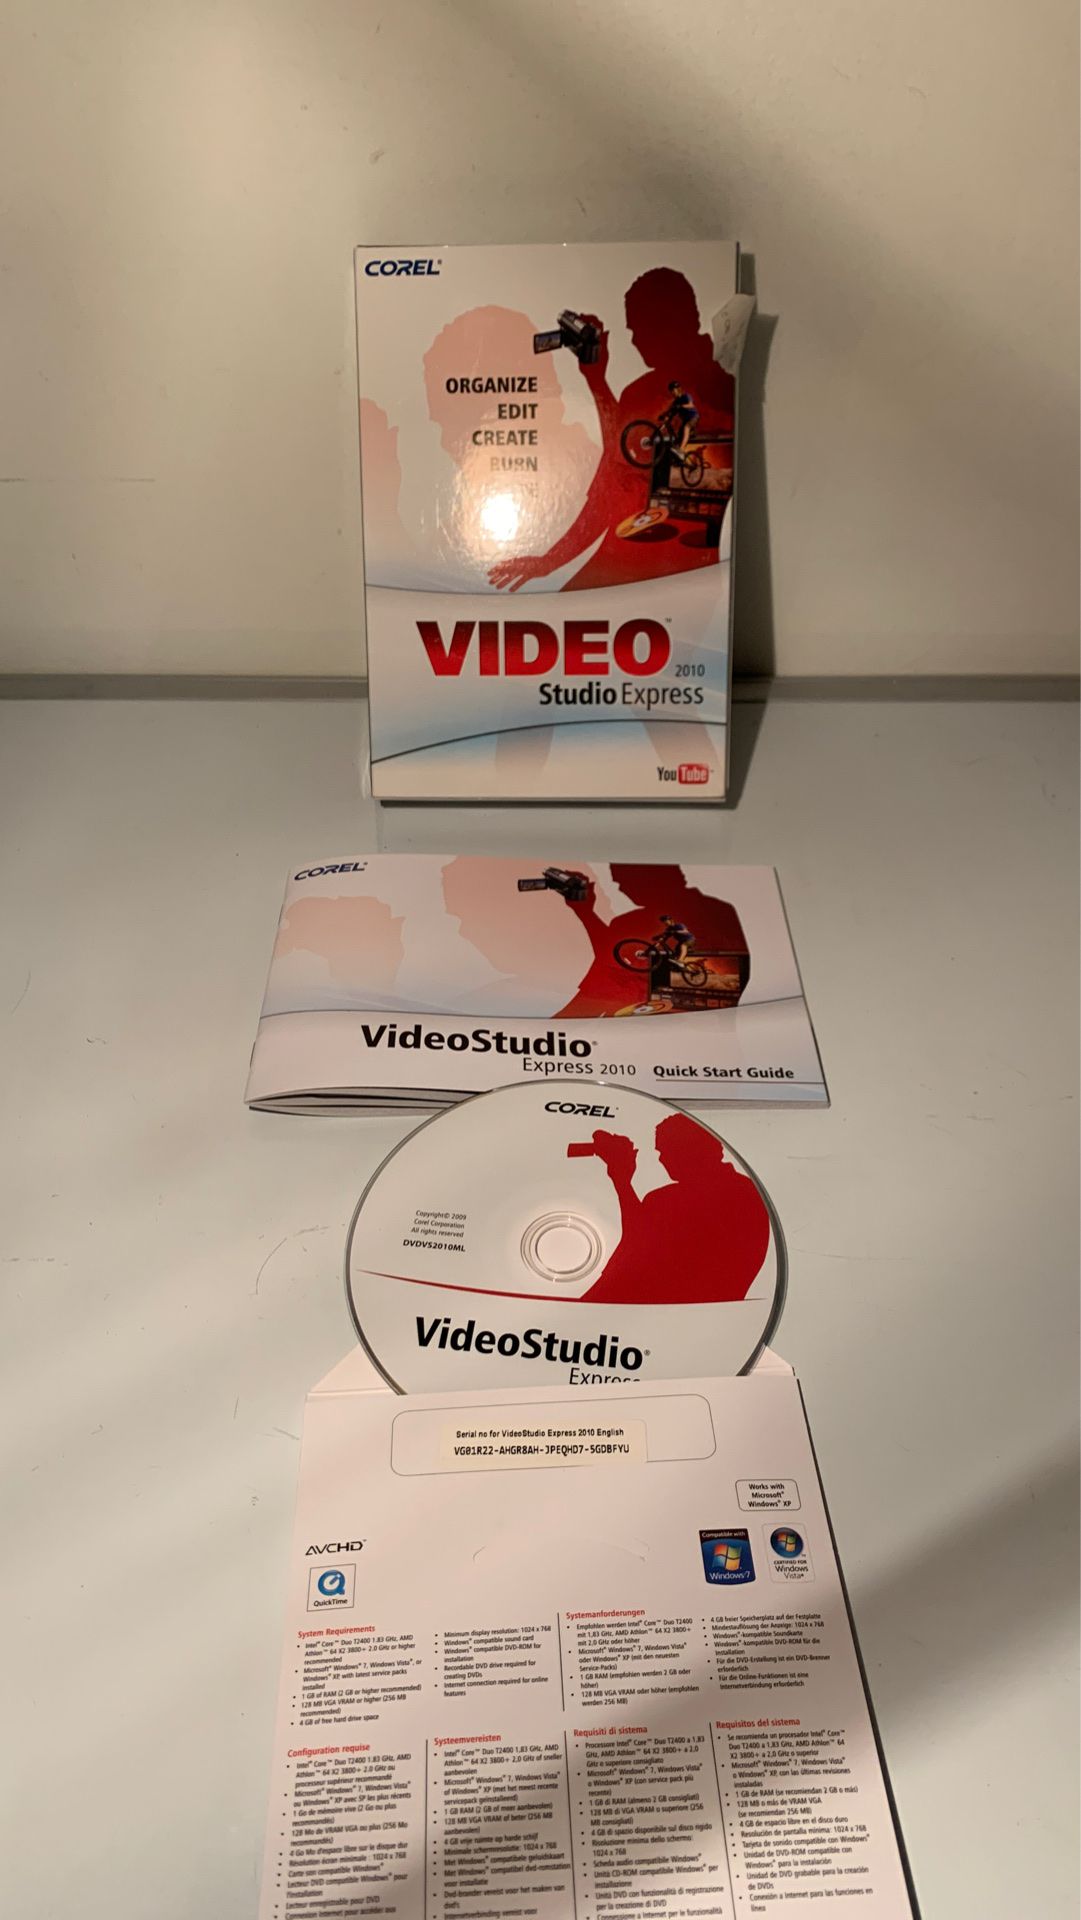 Coral video studio express software with instructions